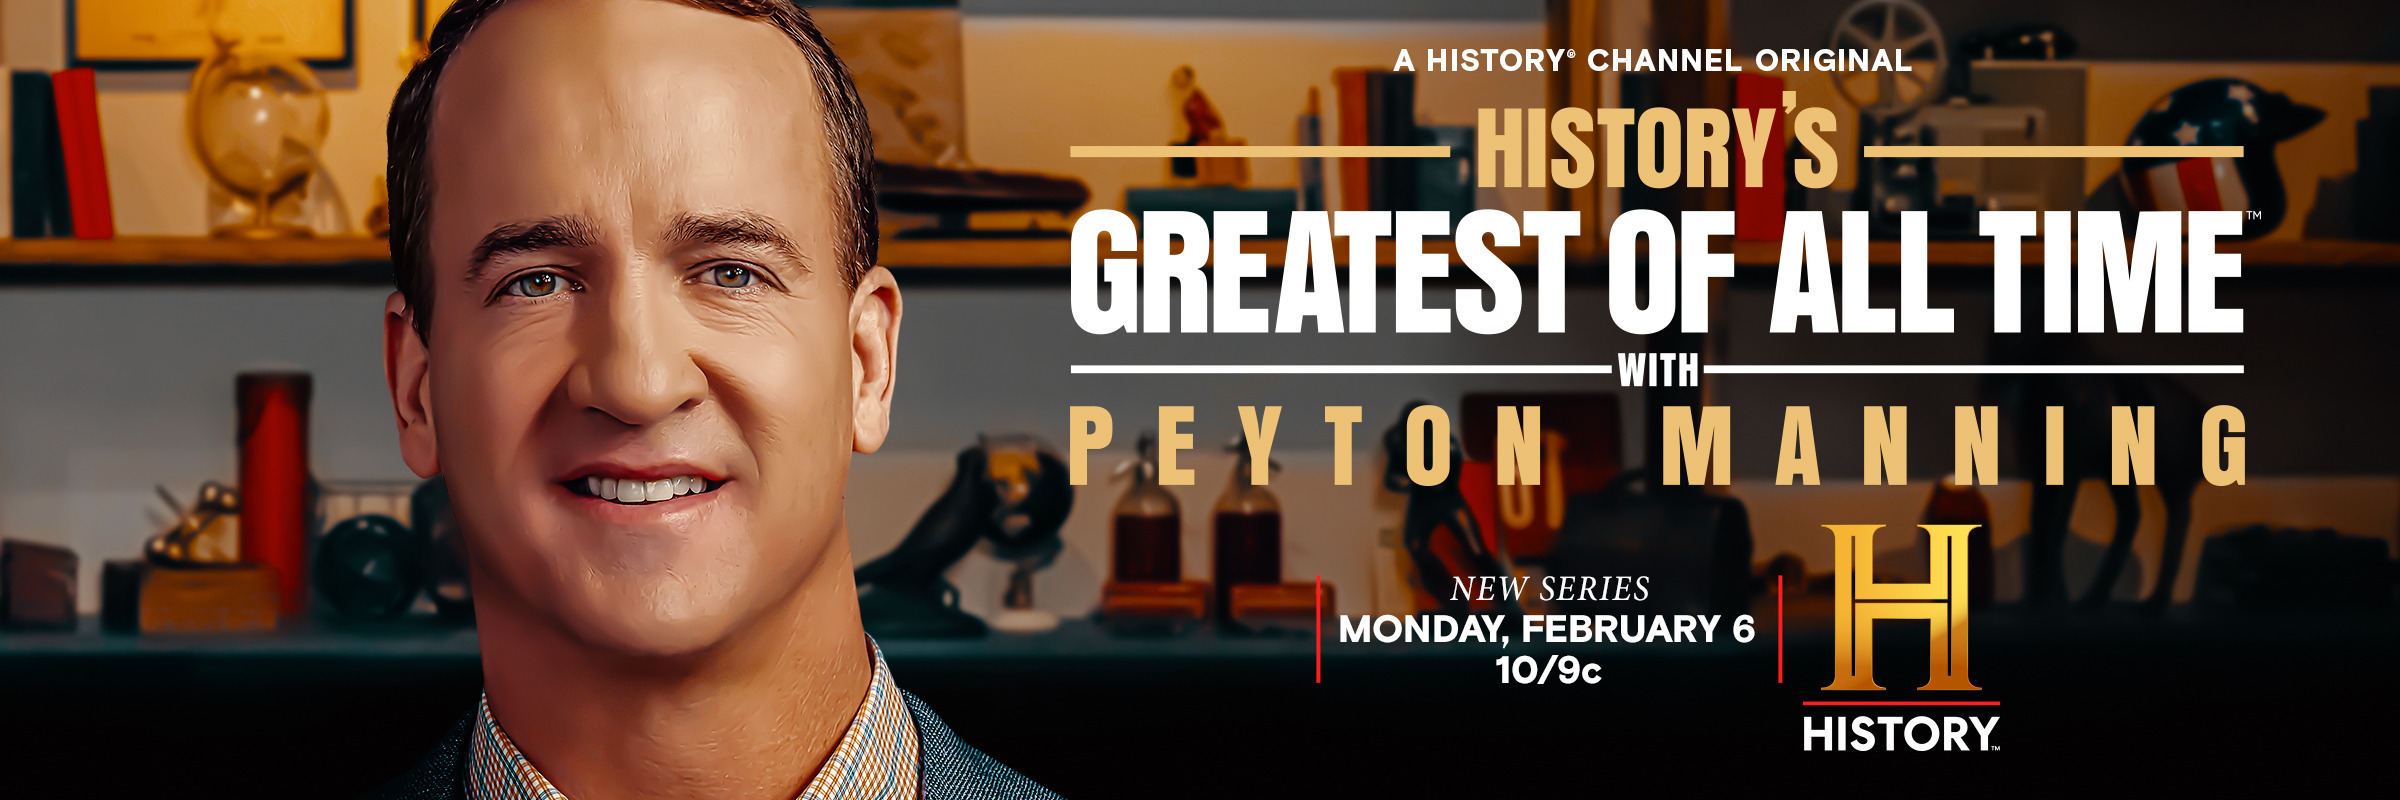 Mega Sized TV Poster Image for History's Greatest of All-Time with Peyton Manning (#2 of 2)